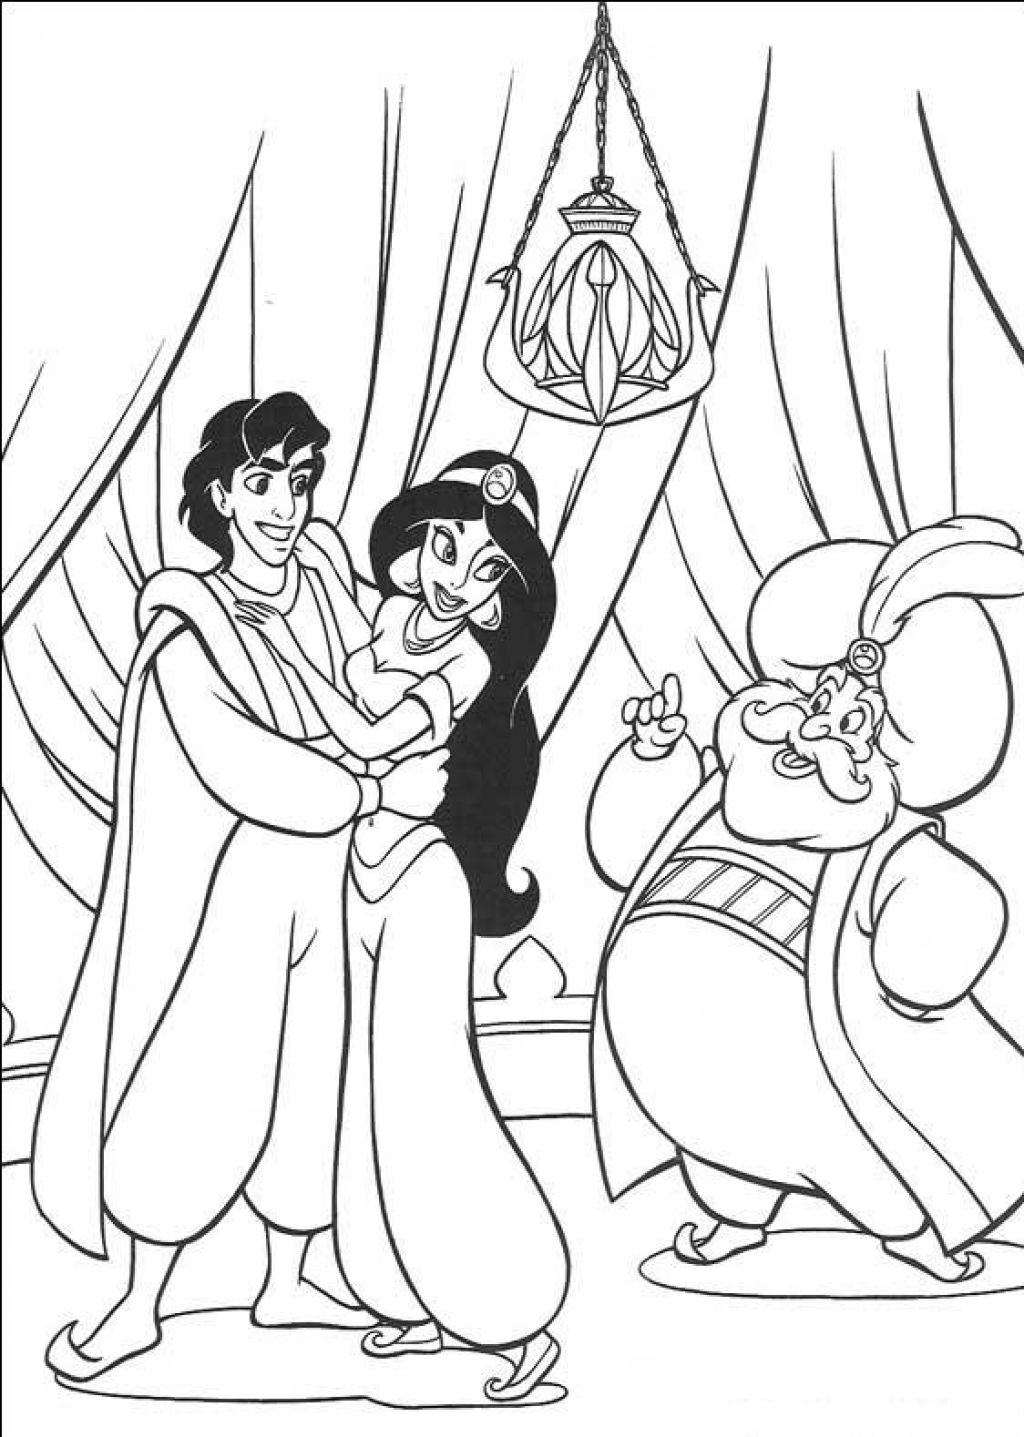 Aladdin, Jasmine and her father the king